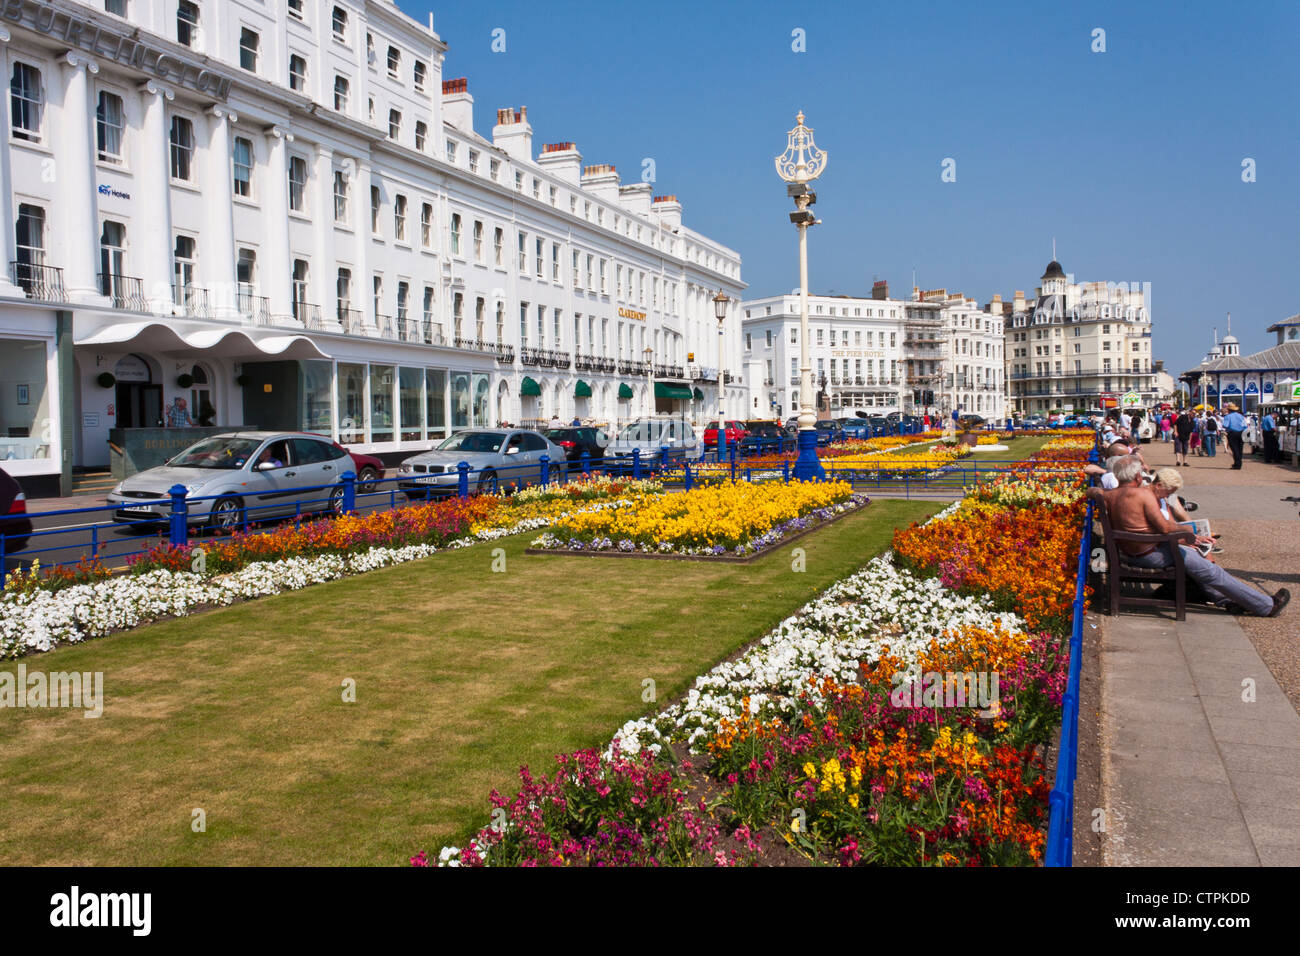 Floral display on the promenade at Eastbourne, an English seaside holiday destination. England, GB, UK. Stock Photo